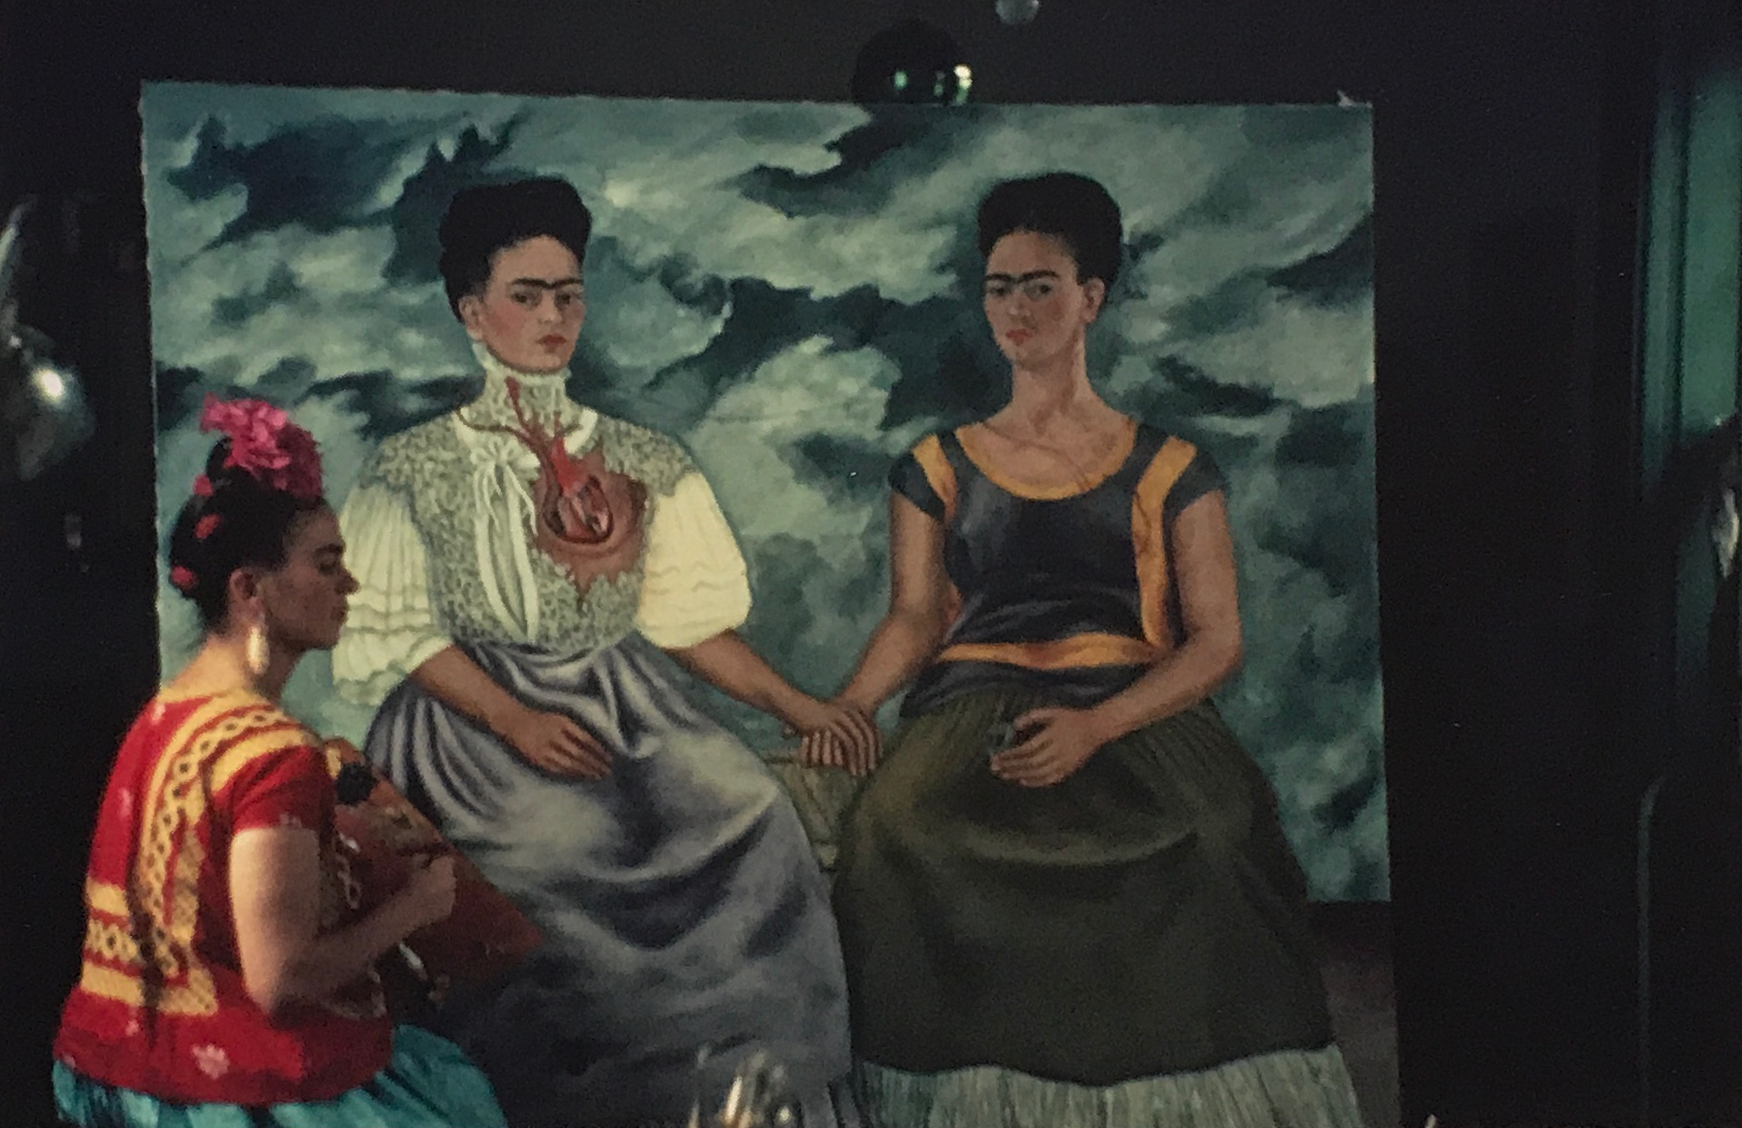 Nicklas Muray, Frida Kahlo painting “Las Dos Fridas (The Two Fridas)”, Photograph, private Collection